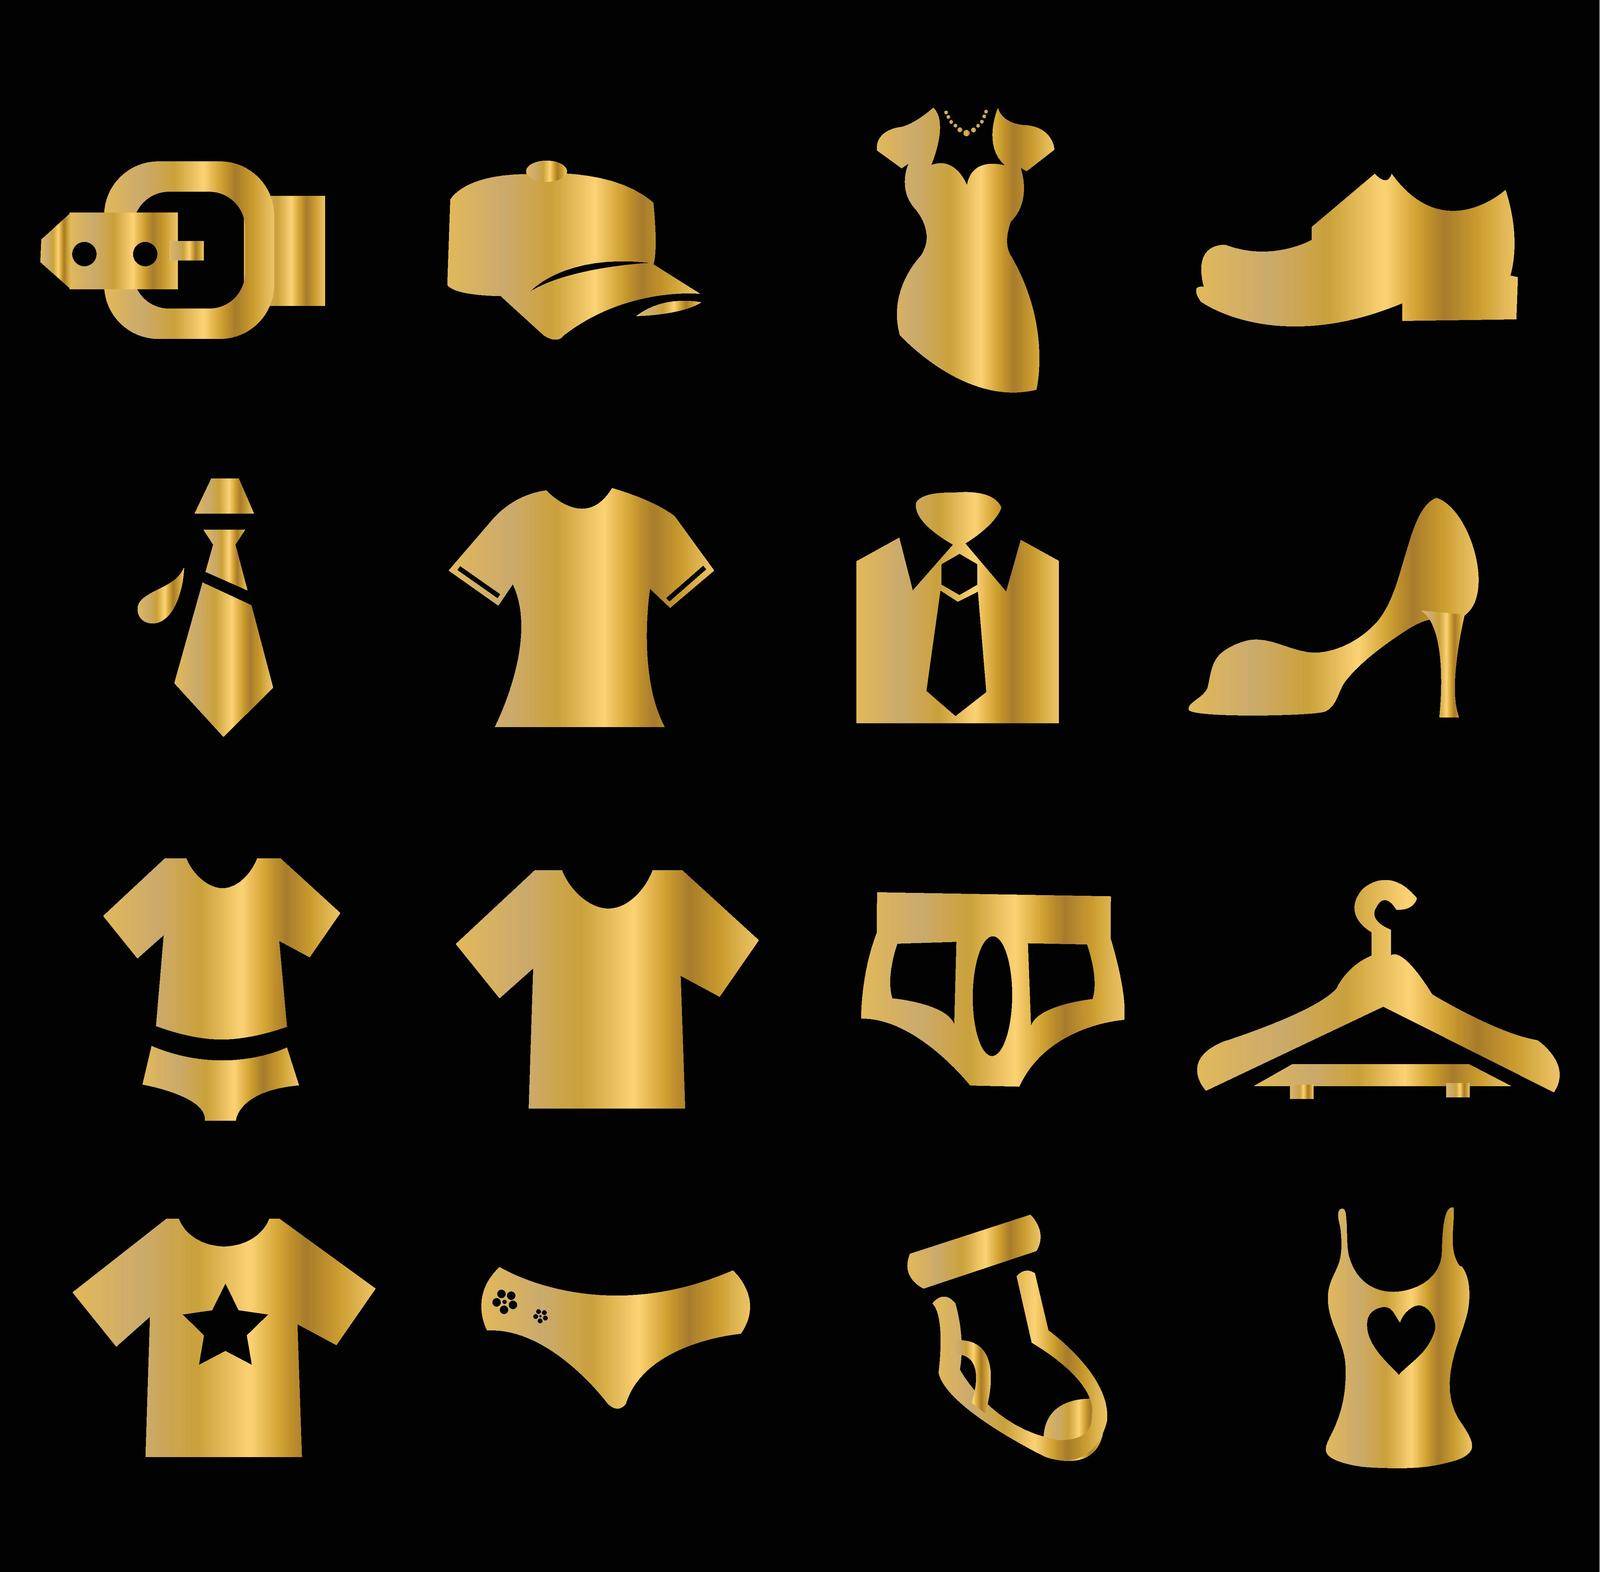 you can use Set of gold clothes icons to design banners, posters, backgrounds, ...etc.